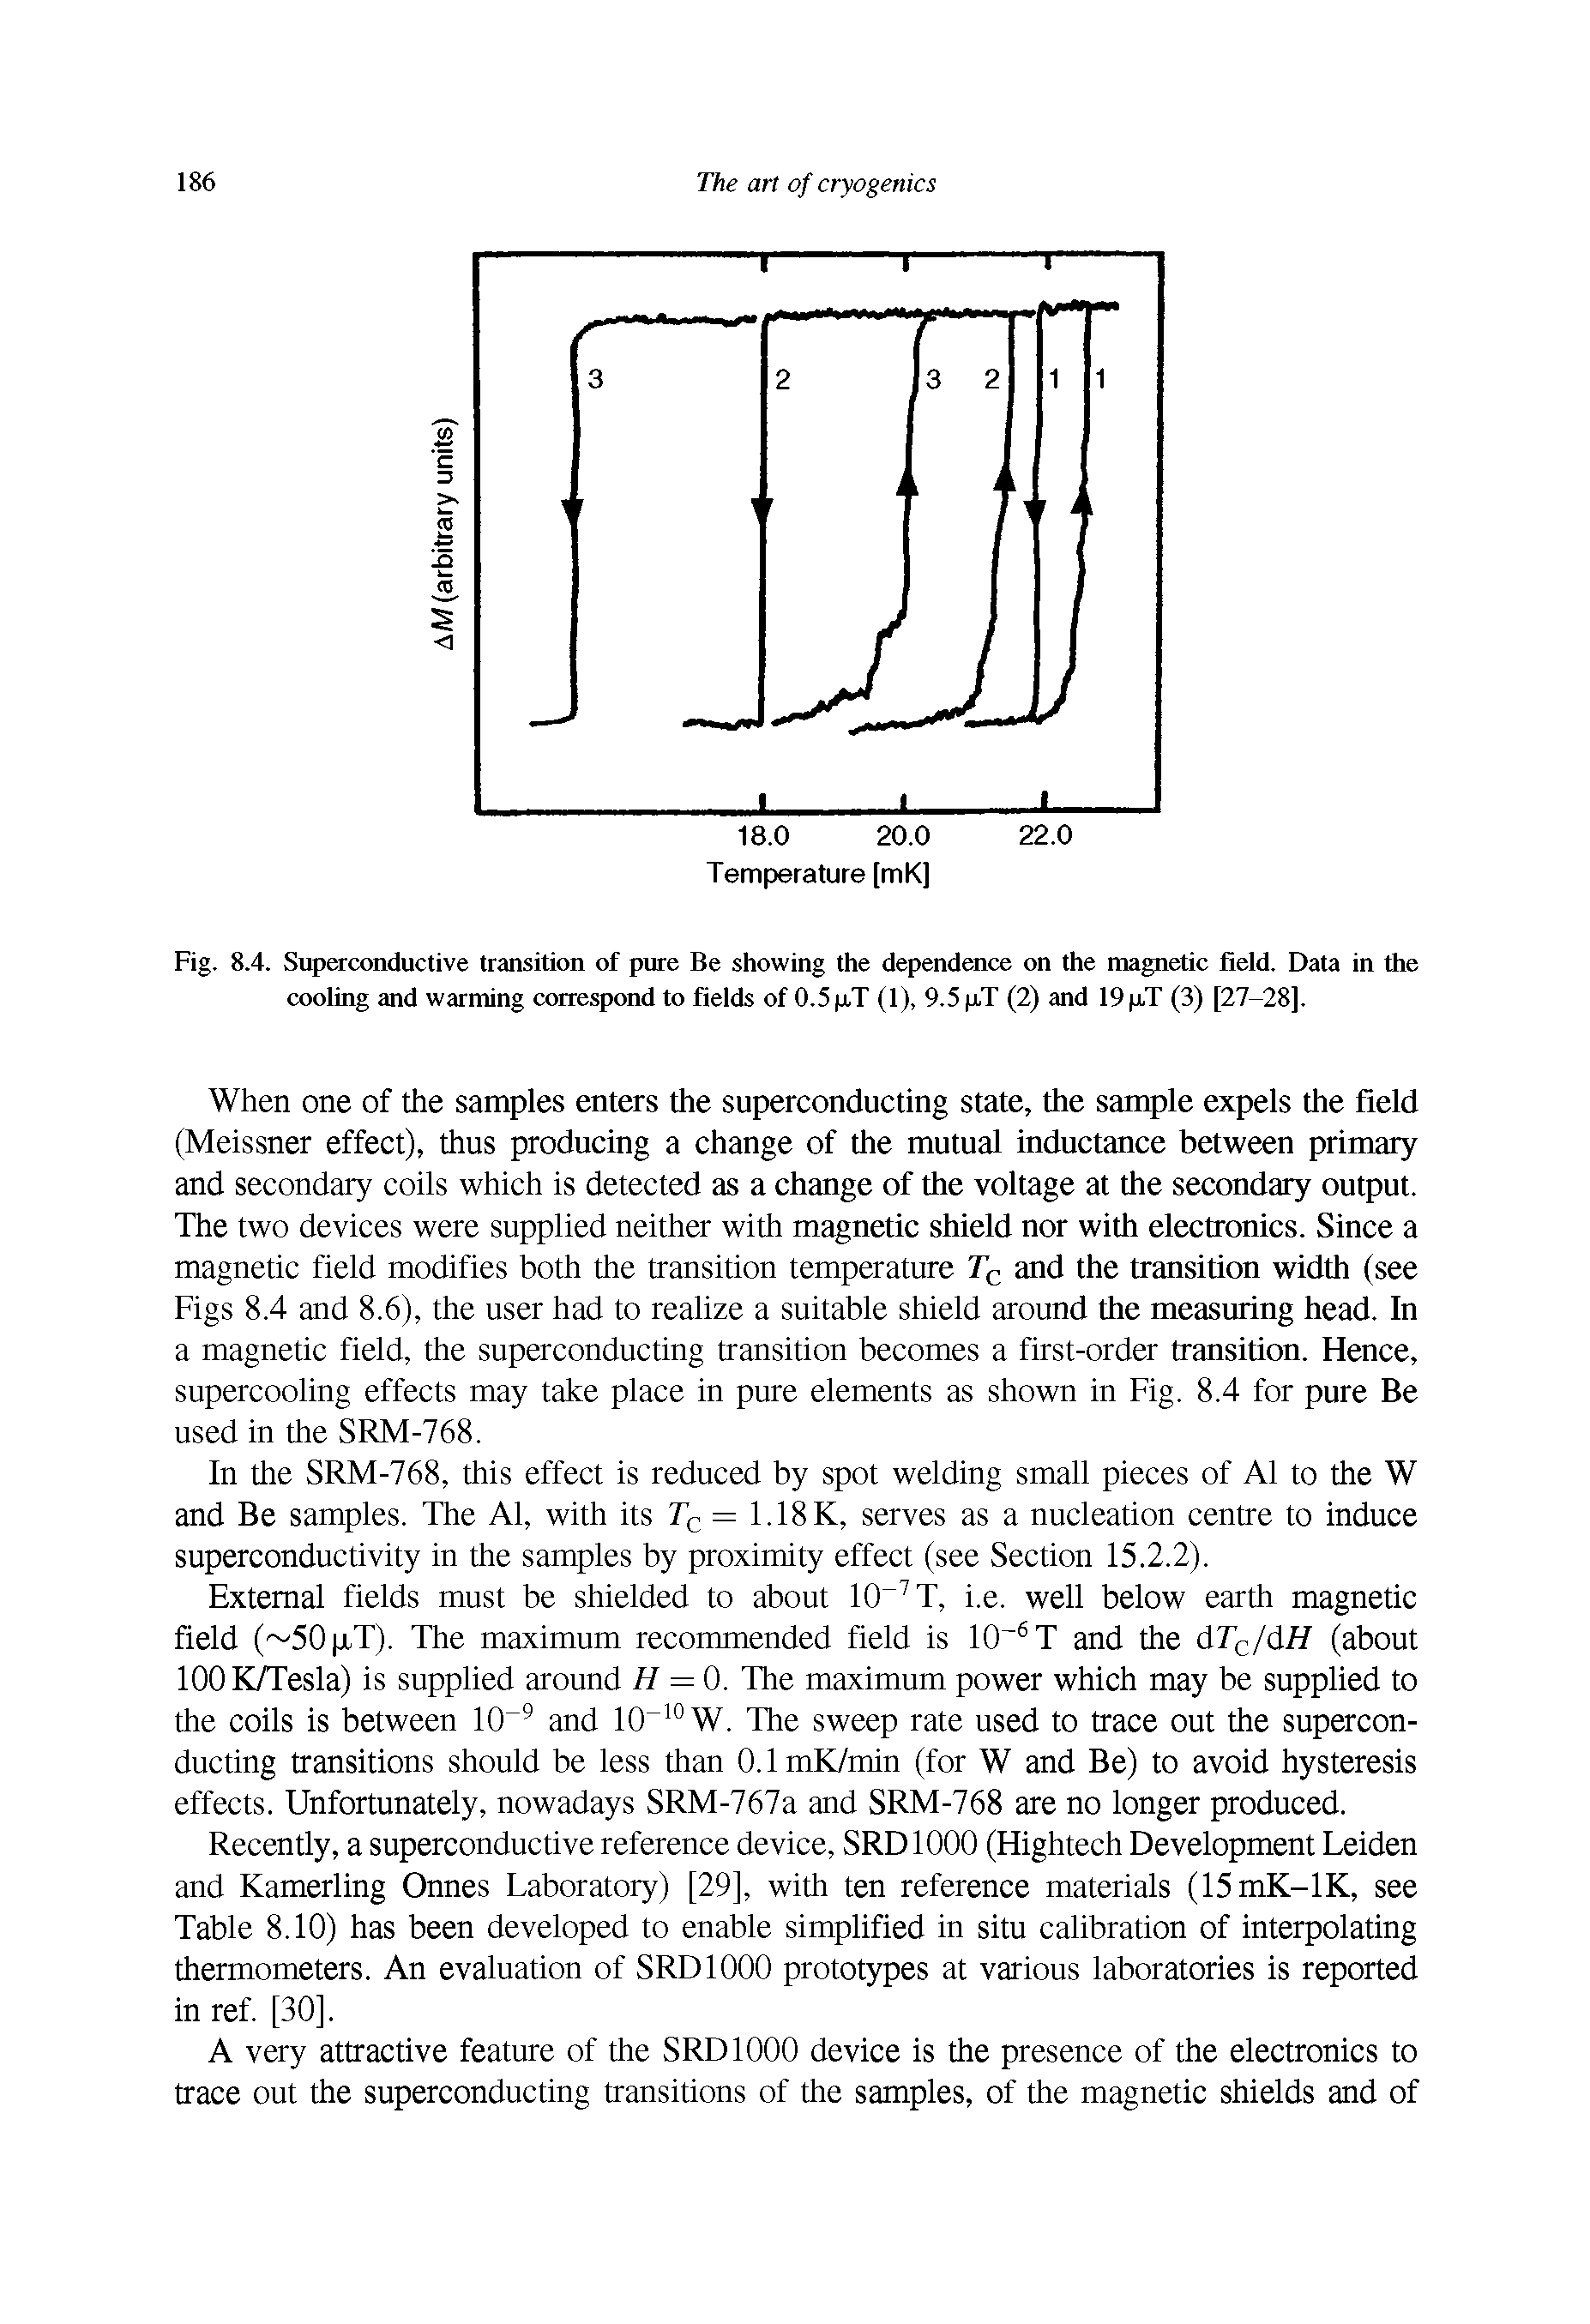 Fig. 8.4. Superconductive transition of pure Be showing the dependence on the magnetic field. Data in die...